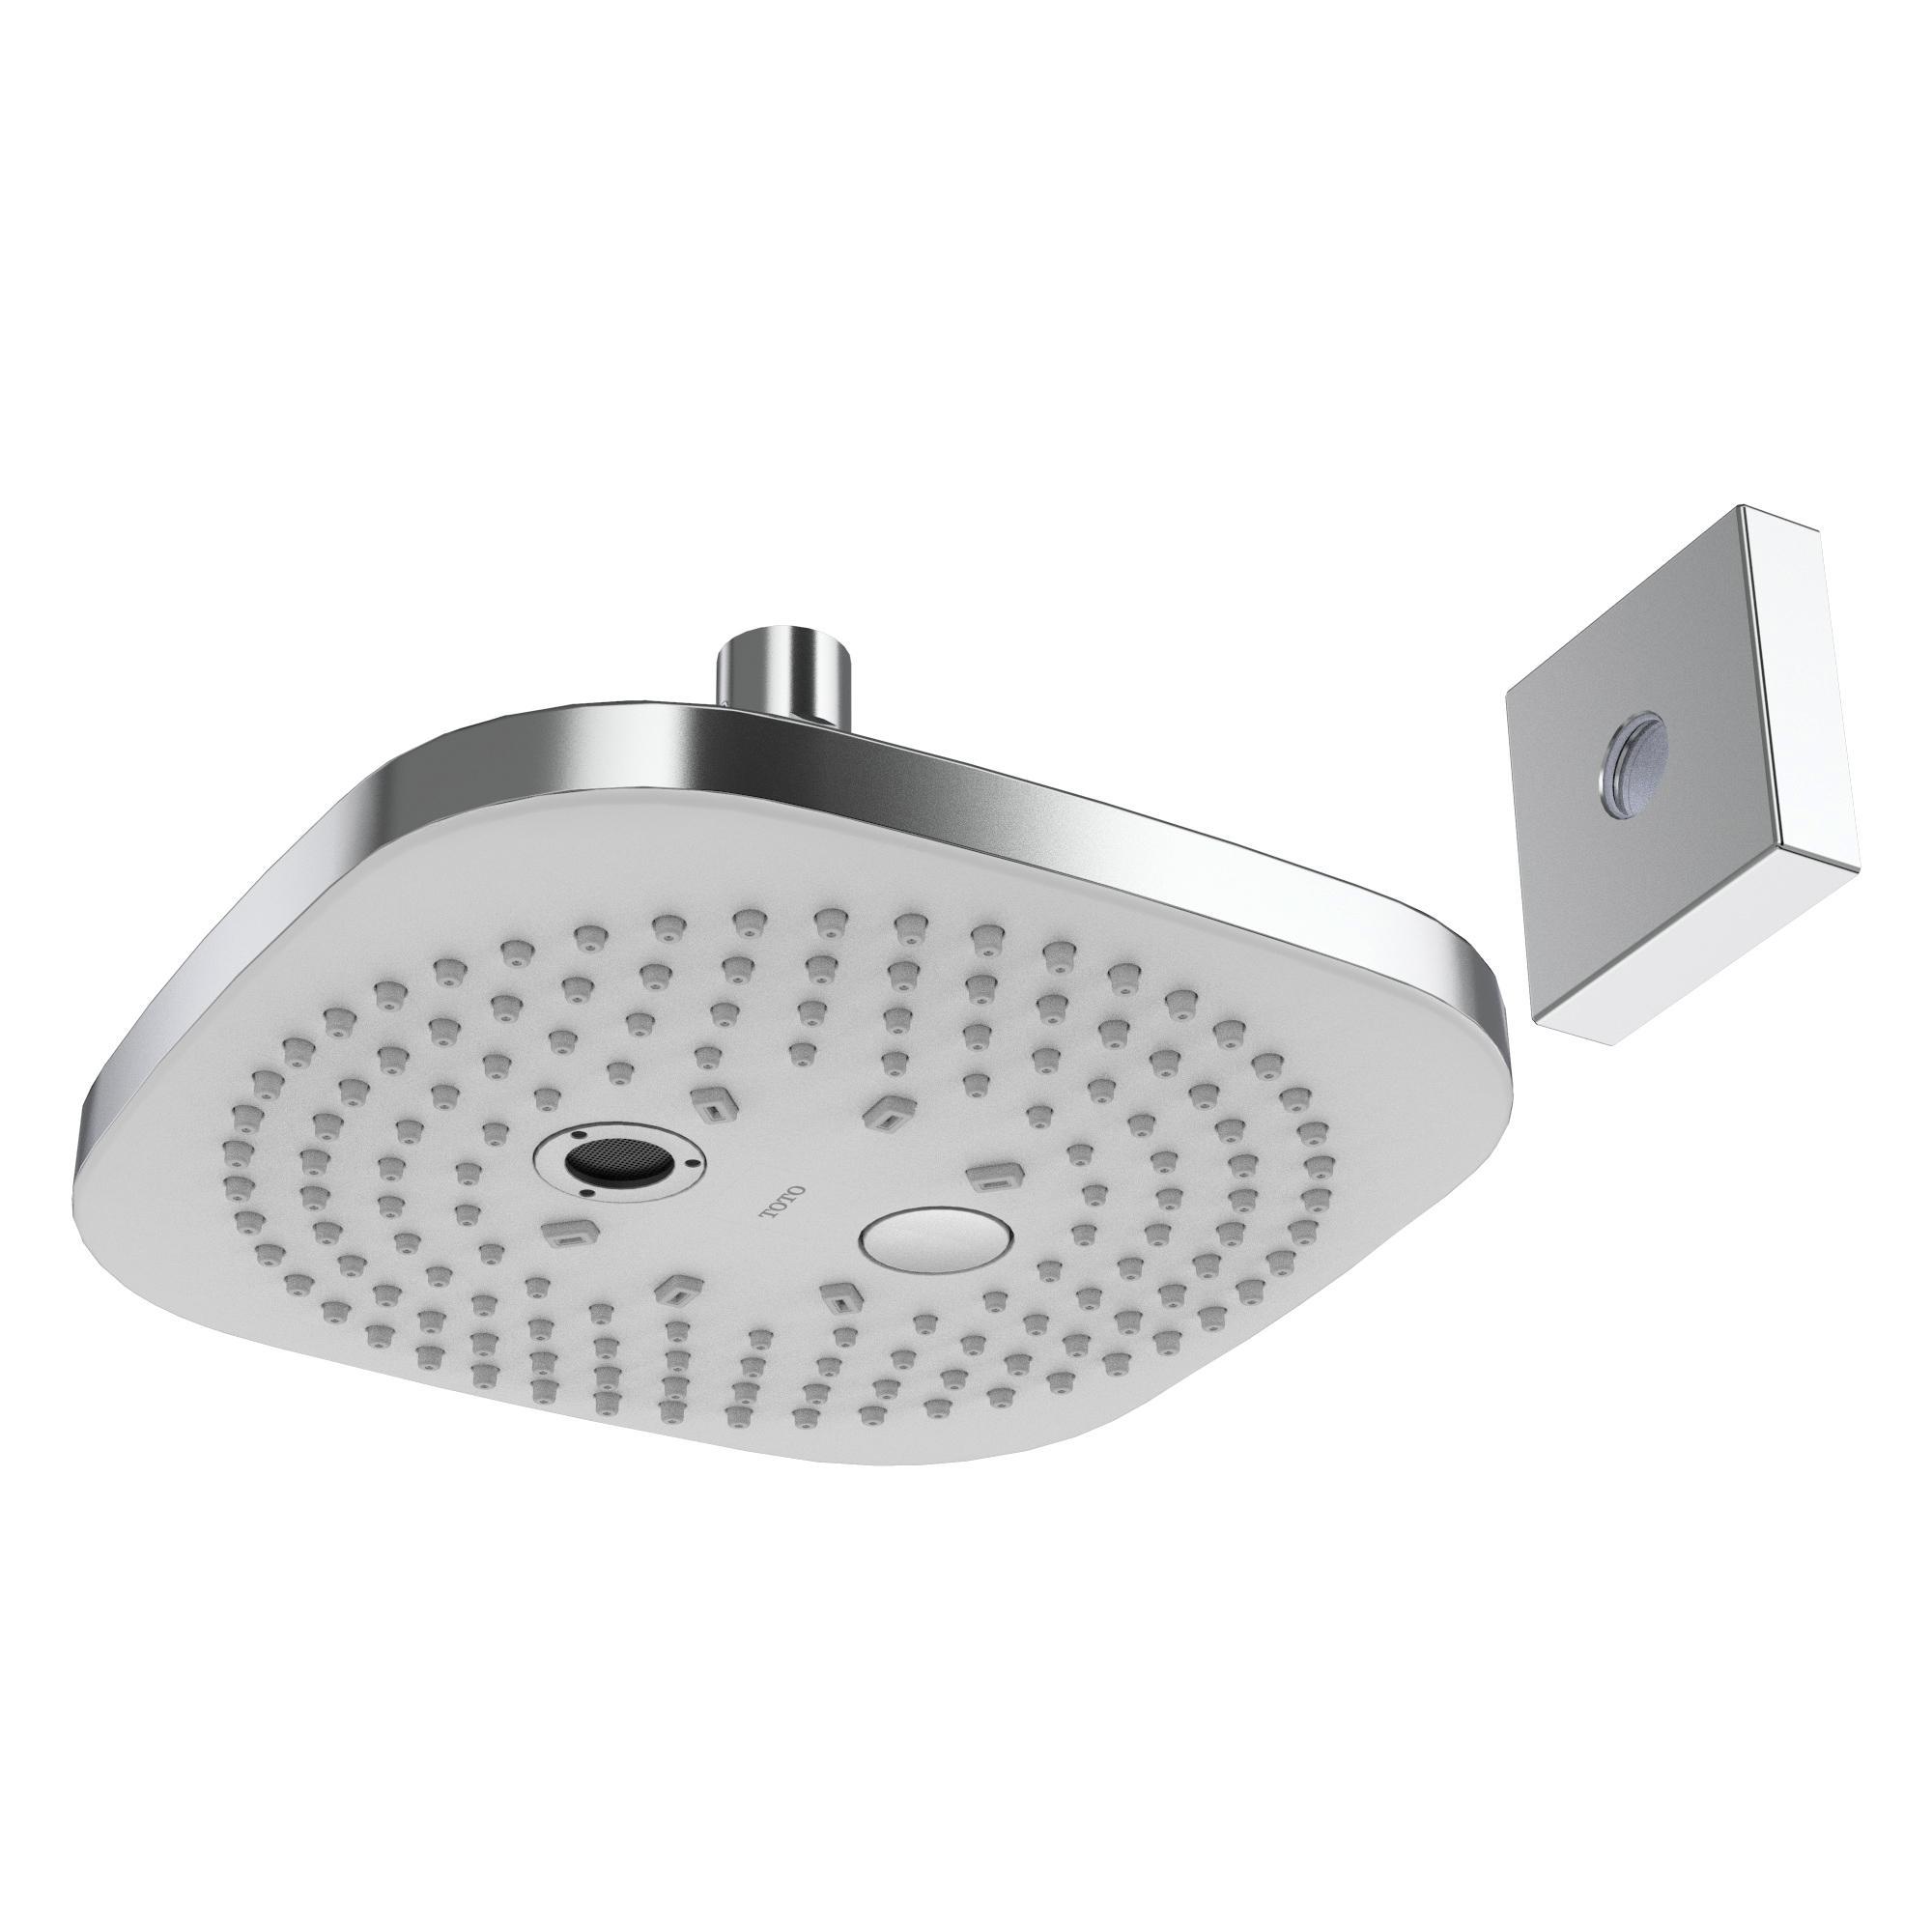 Toto® TBW02004U4#CP G Series Multi-Function Showerhead With COMFORT WAVE® and WARM SPA® Technology, 1.75 gpm Max Flow, 2 Sprays, Wall Mount, 8-1/2 in Head, Import